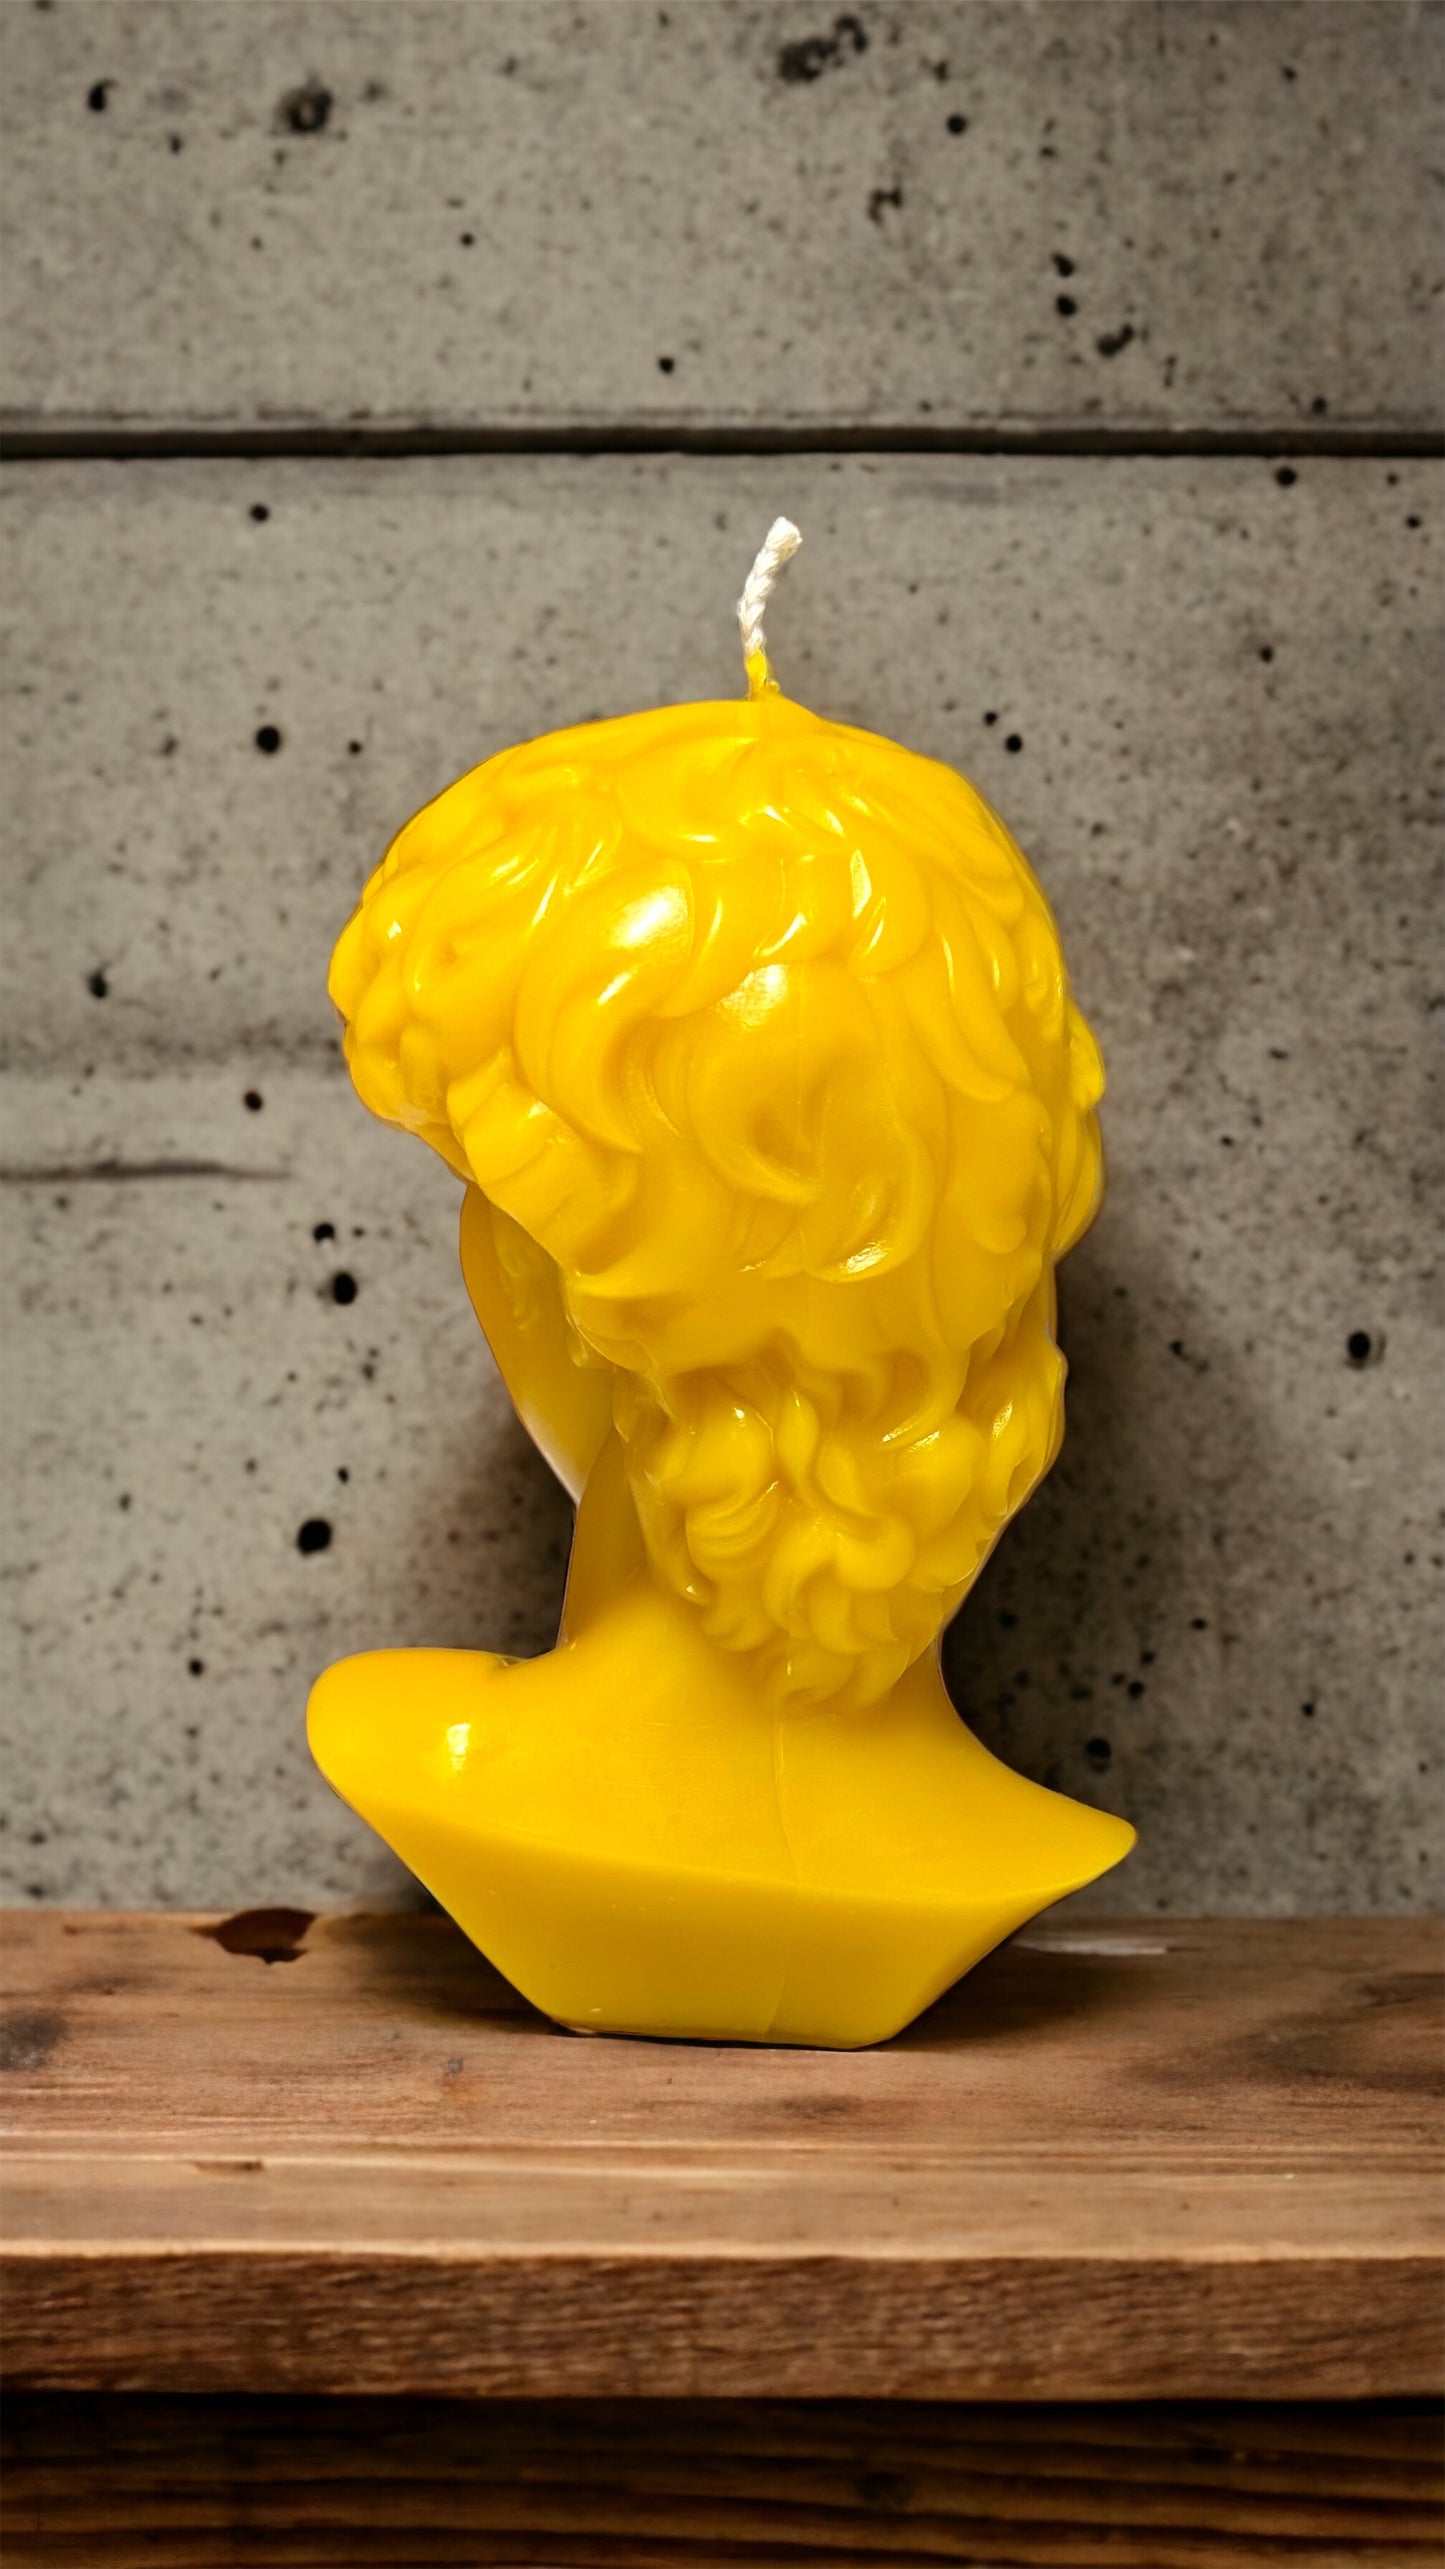 David Head Statue Candle - 100% Pure Beeswax Candle